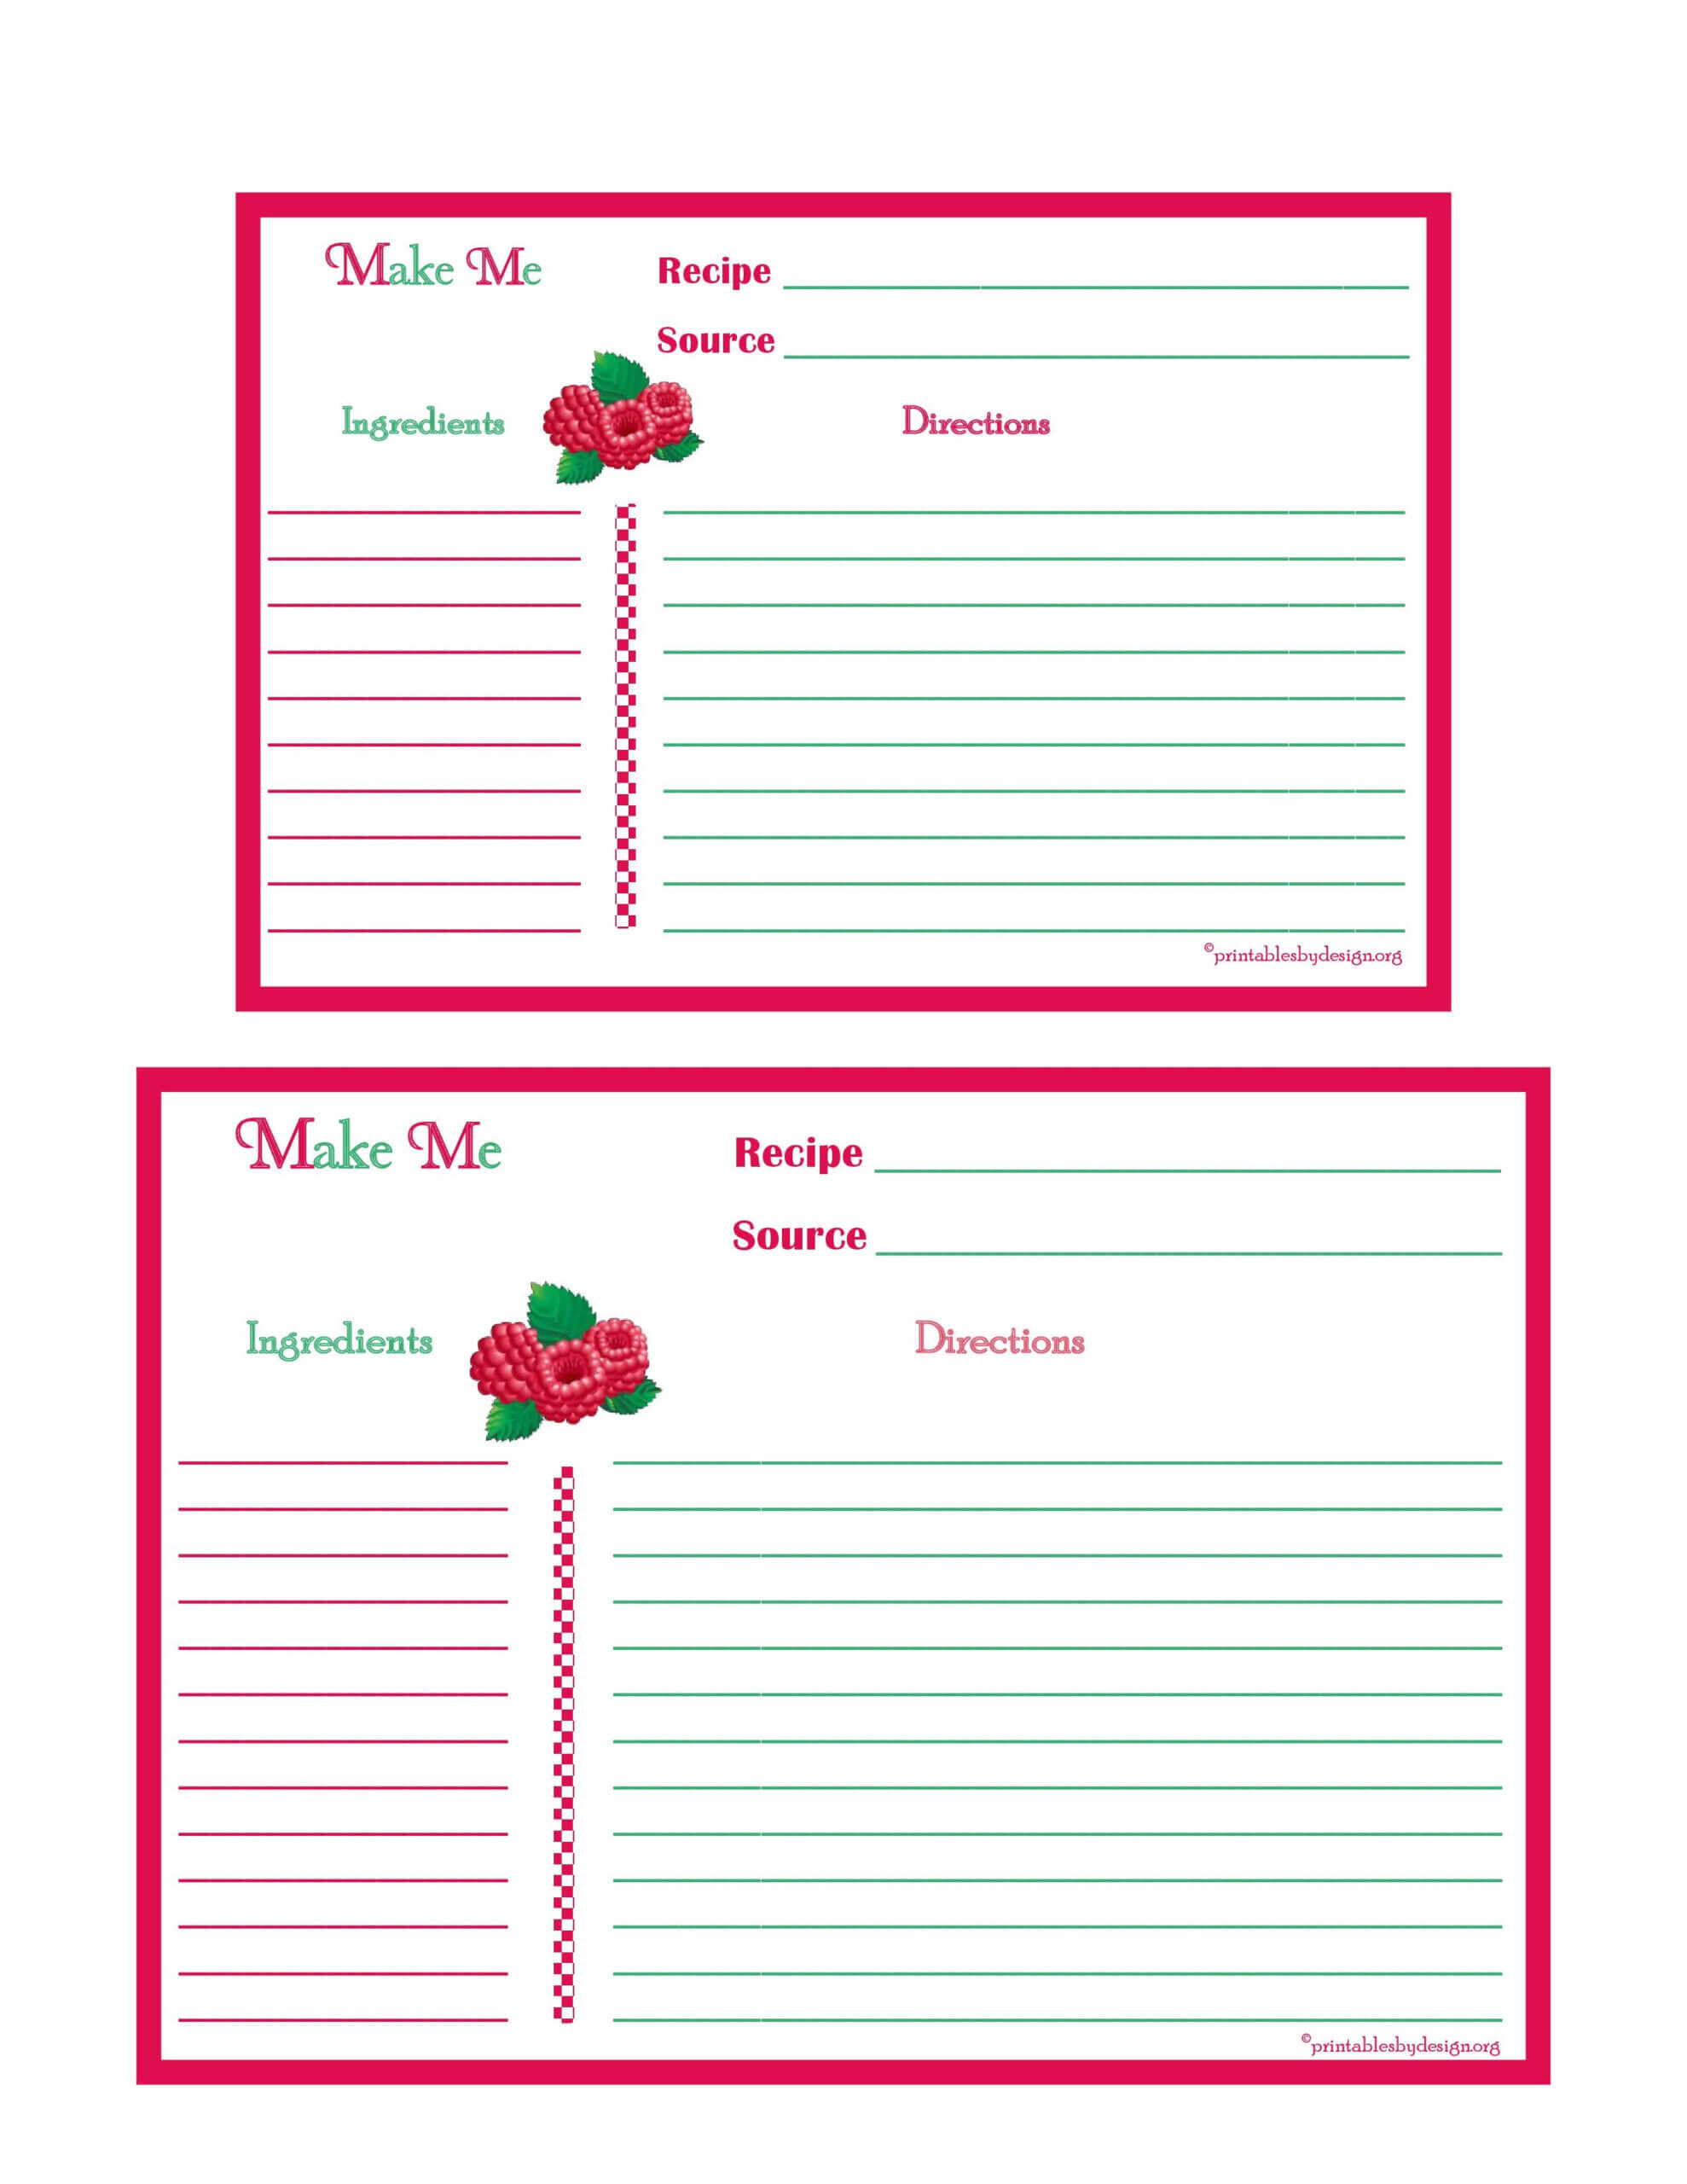 Raspberries Recipe Card - 4X6 & 5X7 Page | Printable Recipe Intended For 4X6 Photo Card Template Free